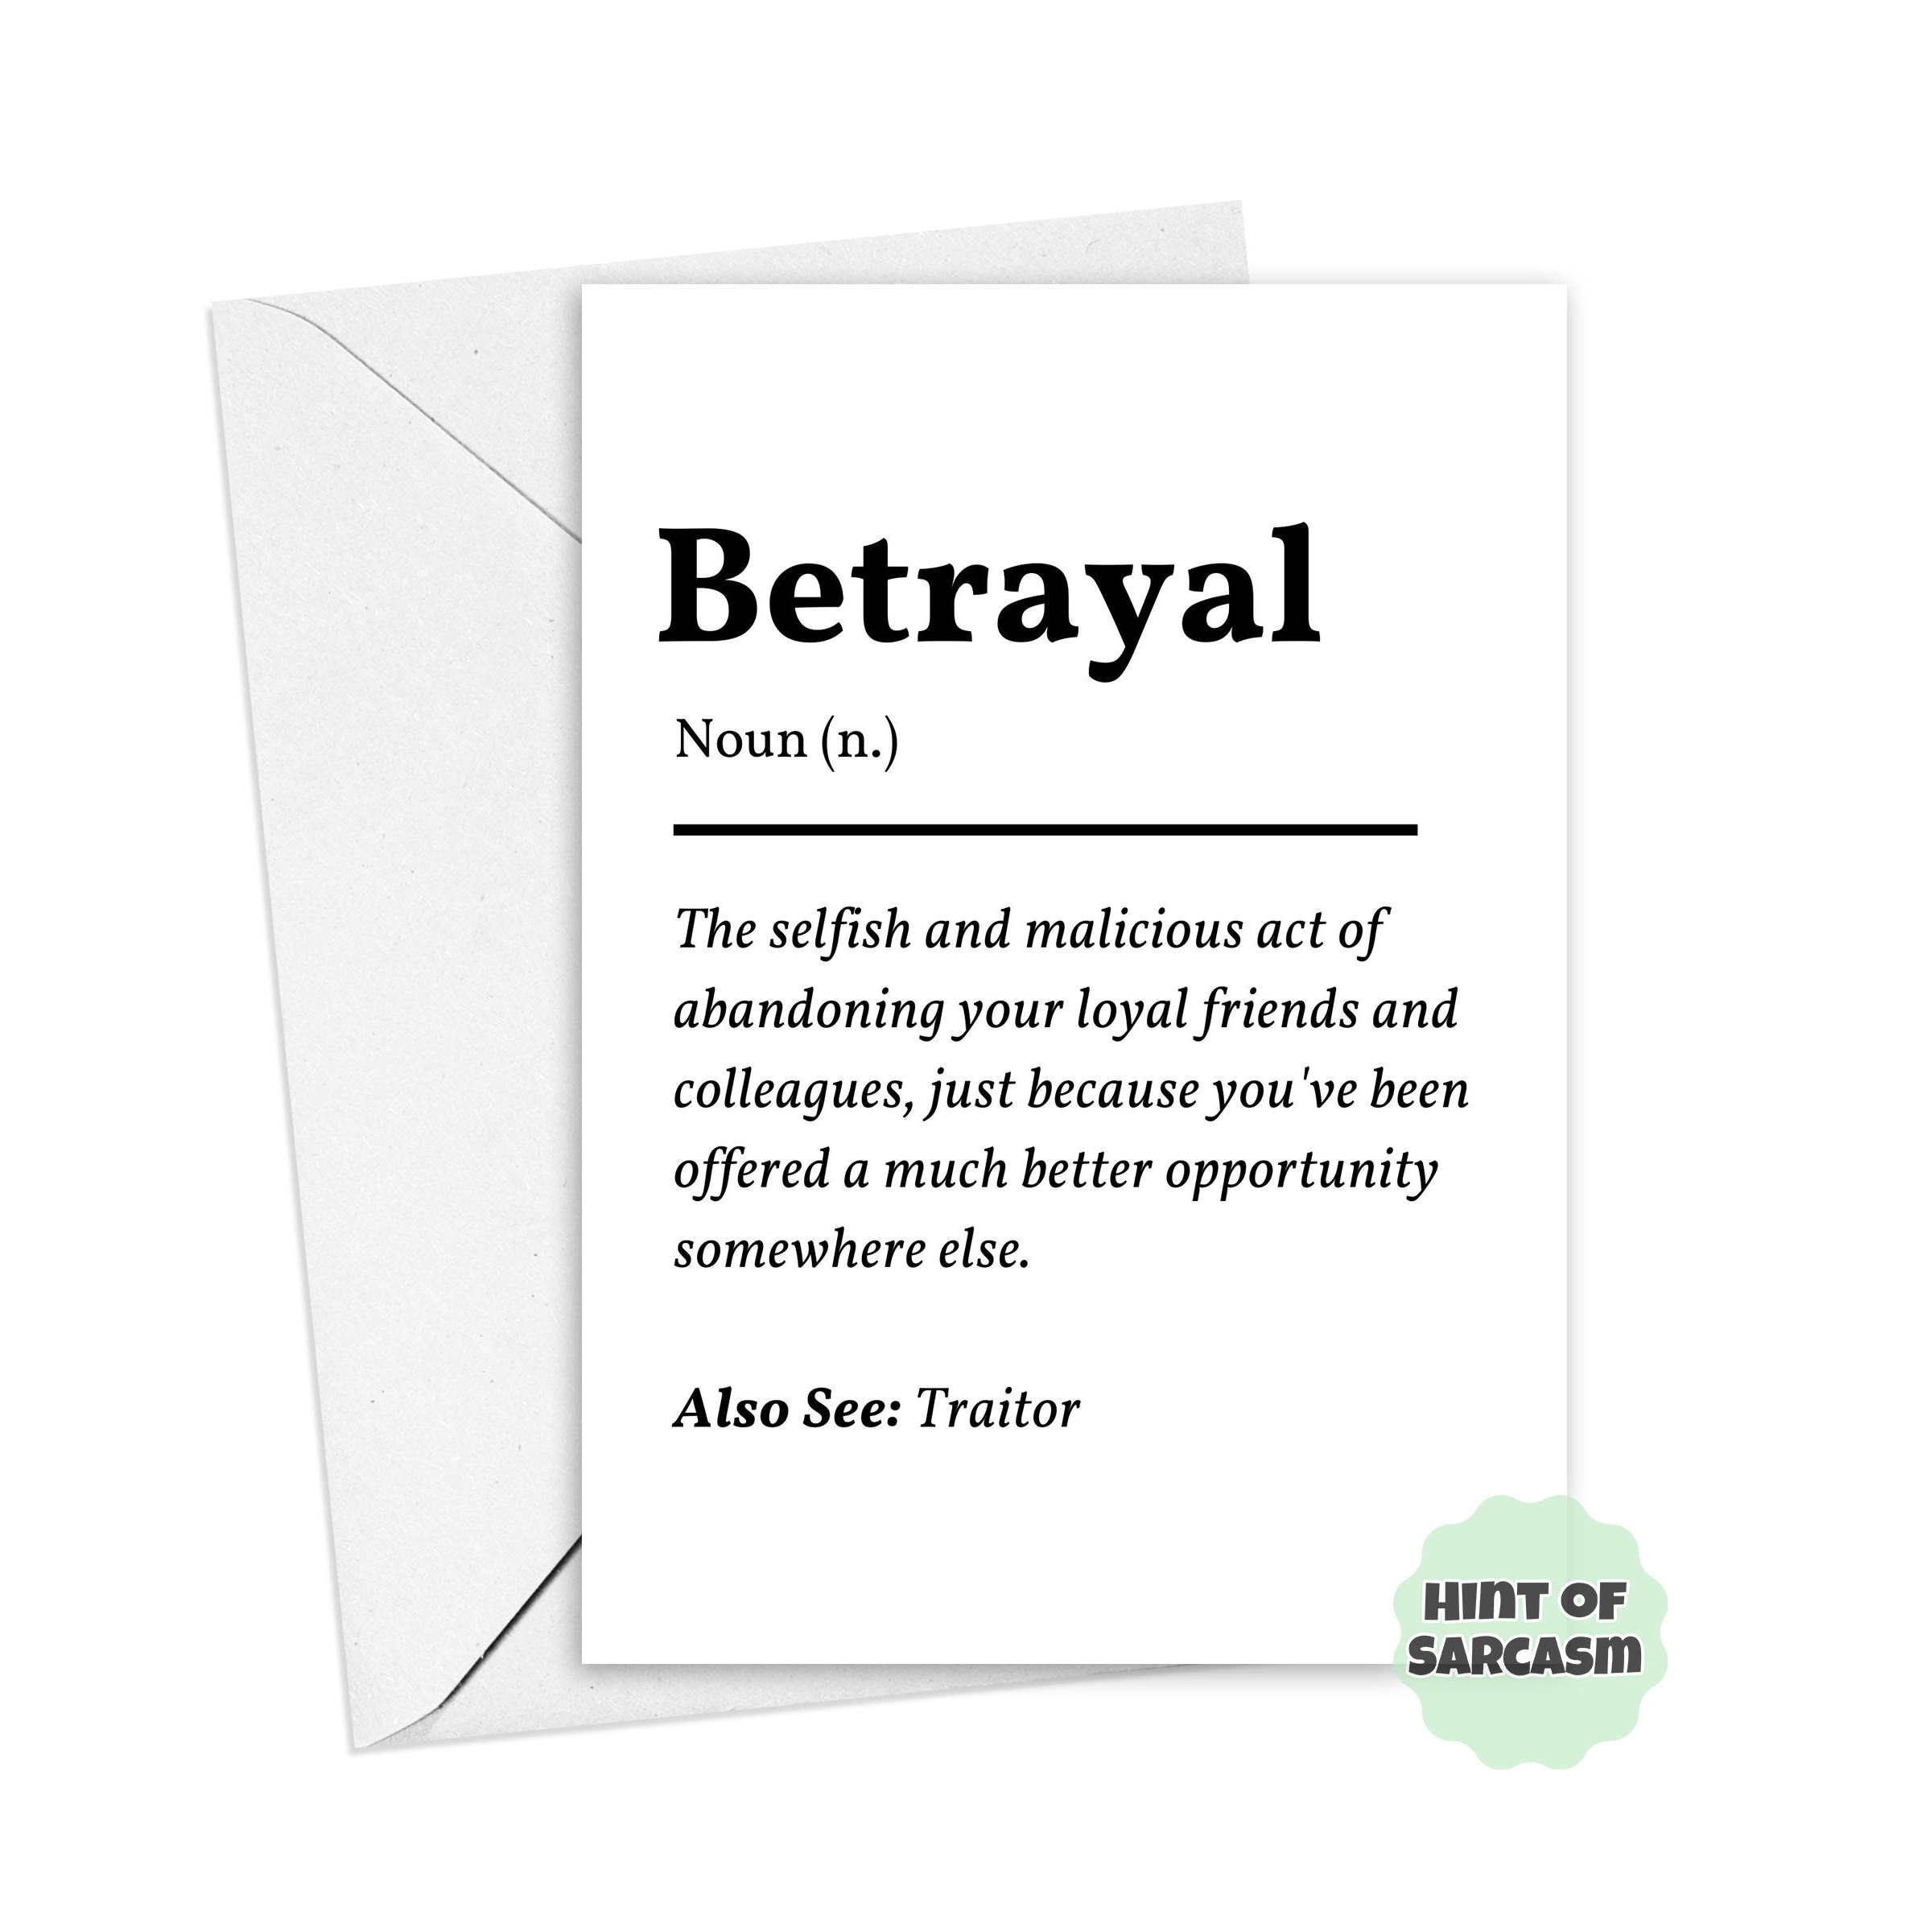 Words Betrayer and Traitor have similar meaning